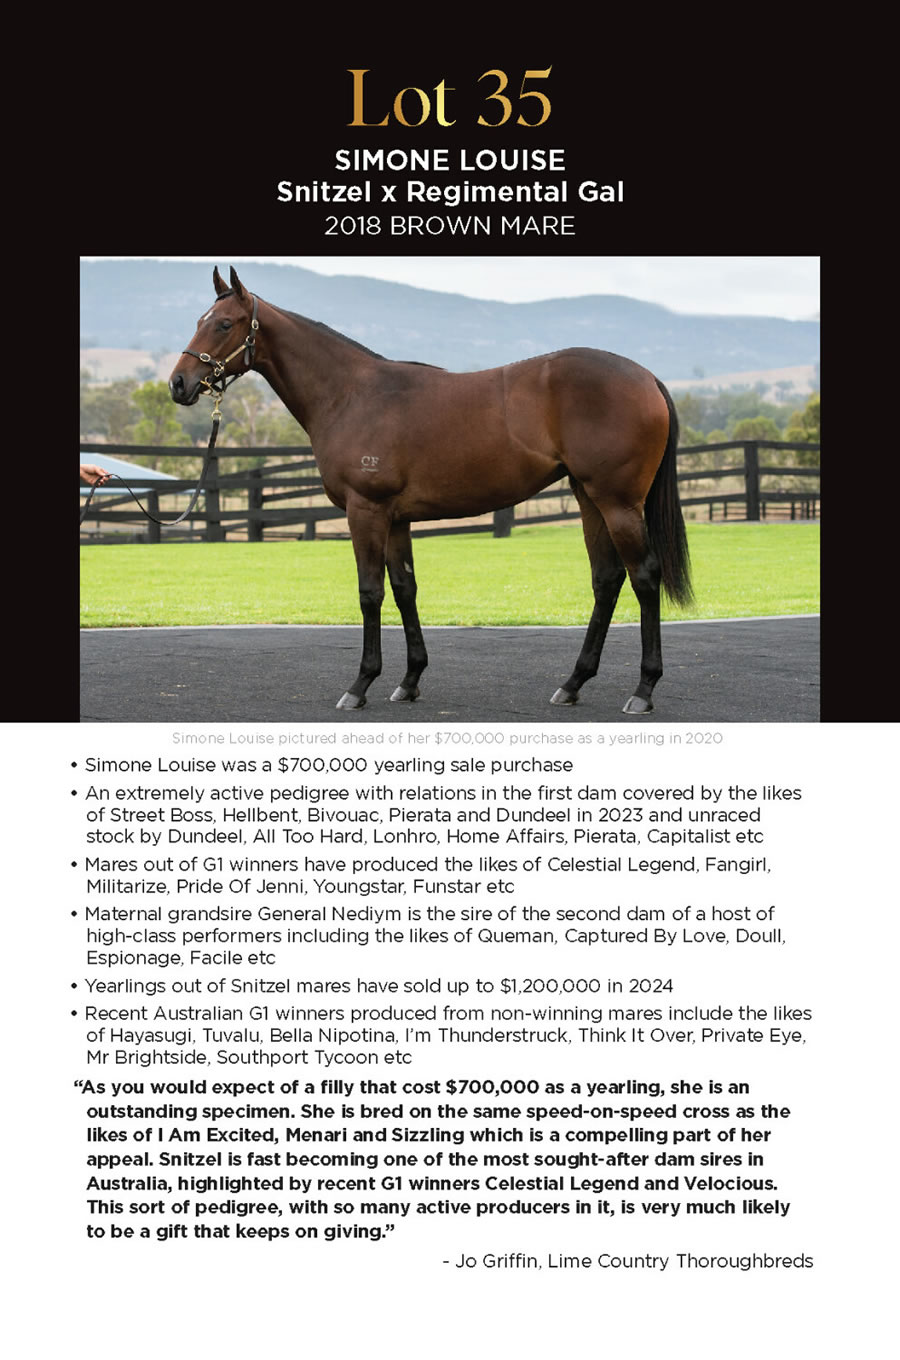 Lime Country Thoroughbreds - Chairman's Sale Lot 35